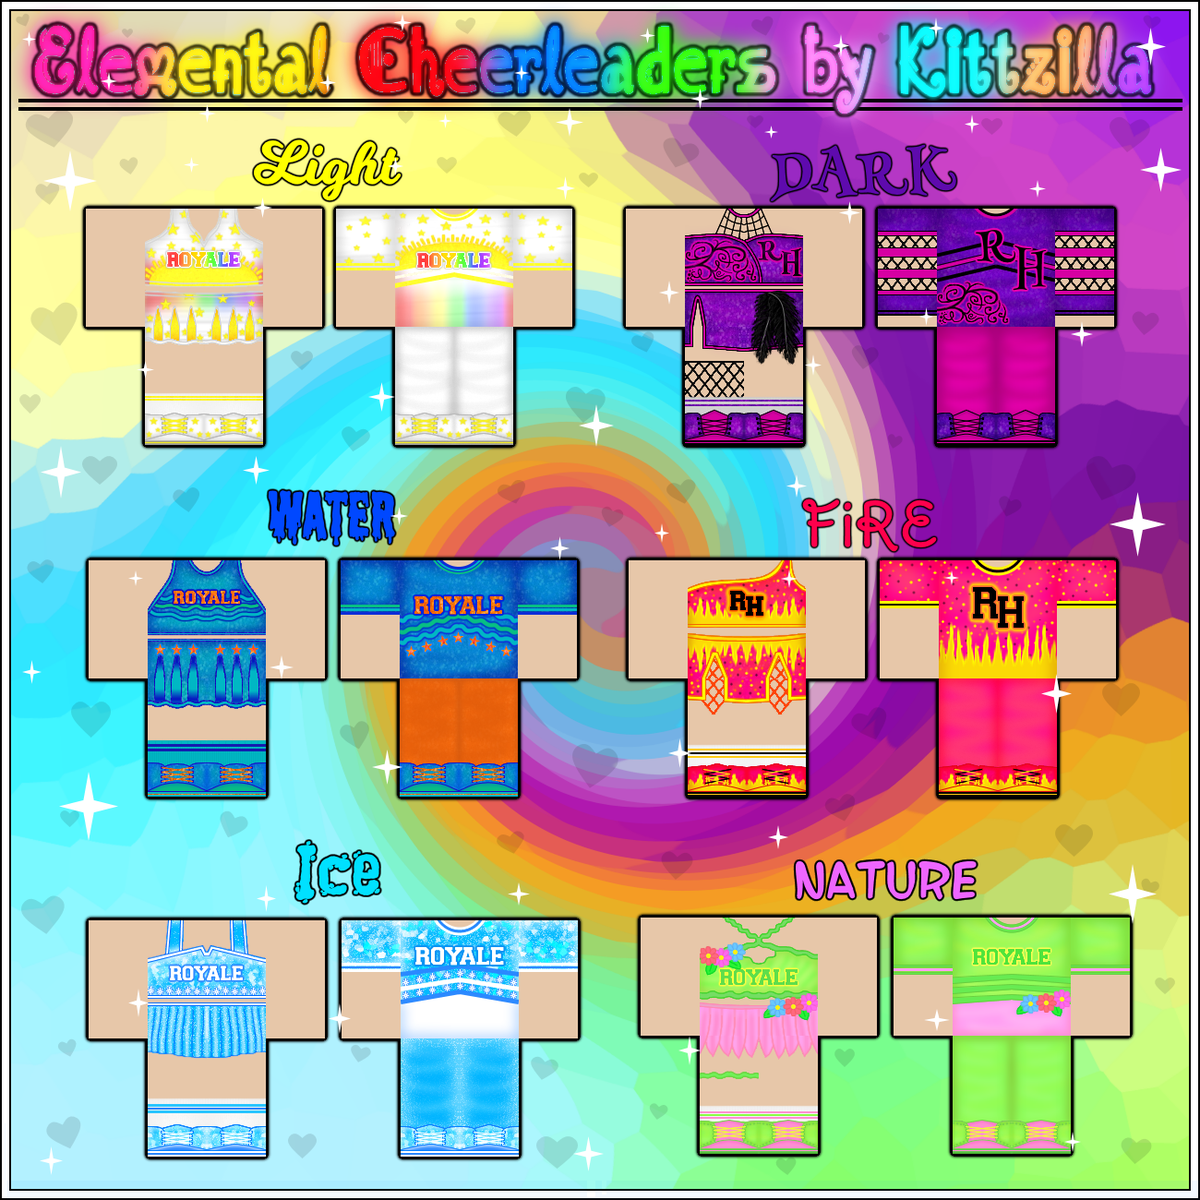 Kittzilla Heaven On Twitter Commission For Nightbarbie New Elemental Cheerleader Outfits I Made For The New Royale High School Coming These Were Super Fun To Create And I - roblox highschool codes cheerleader